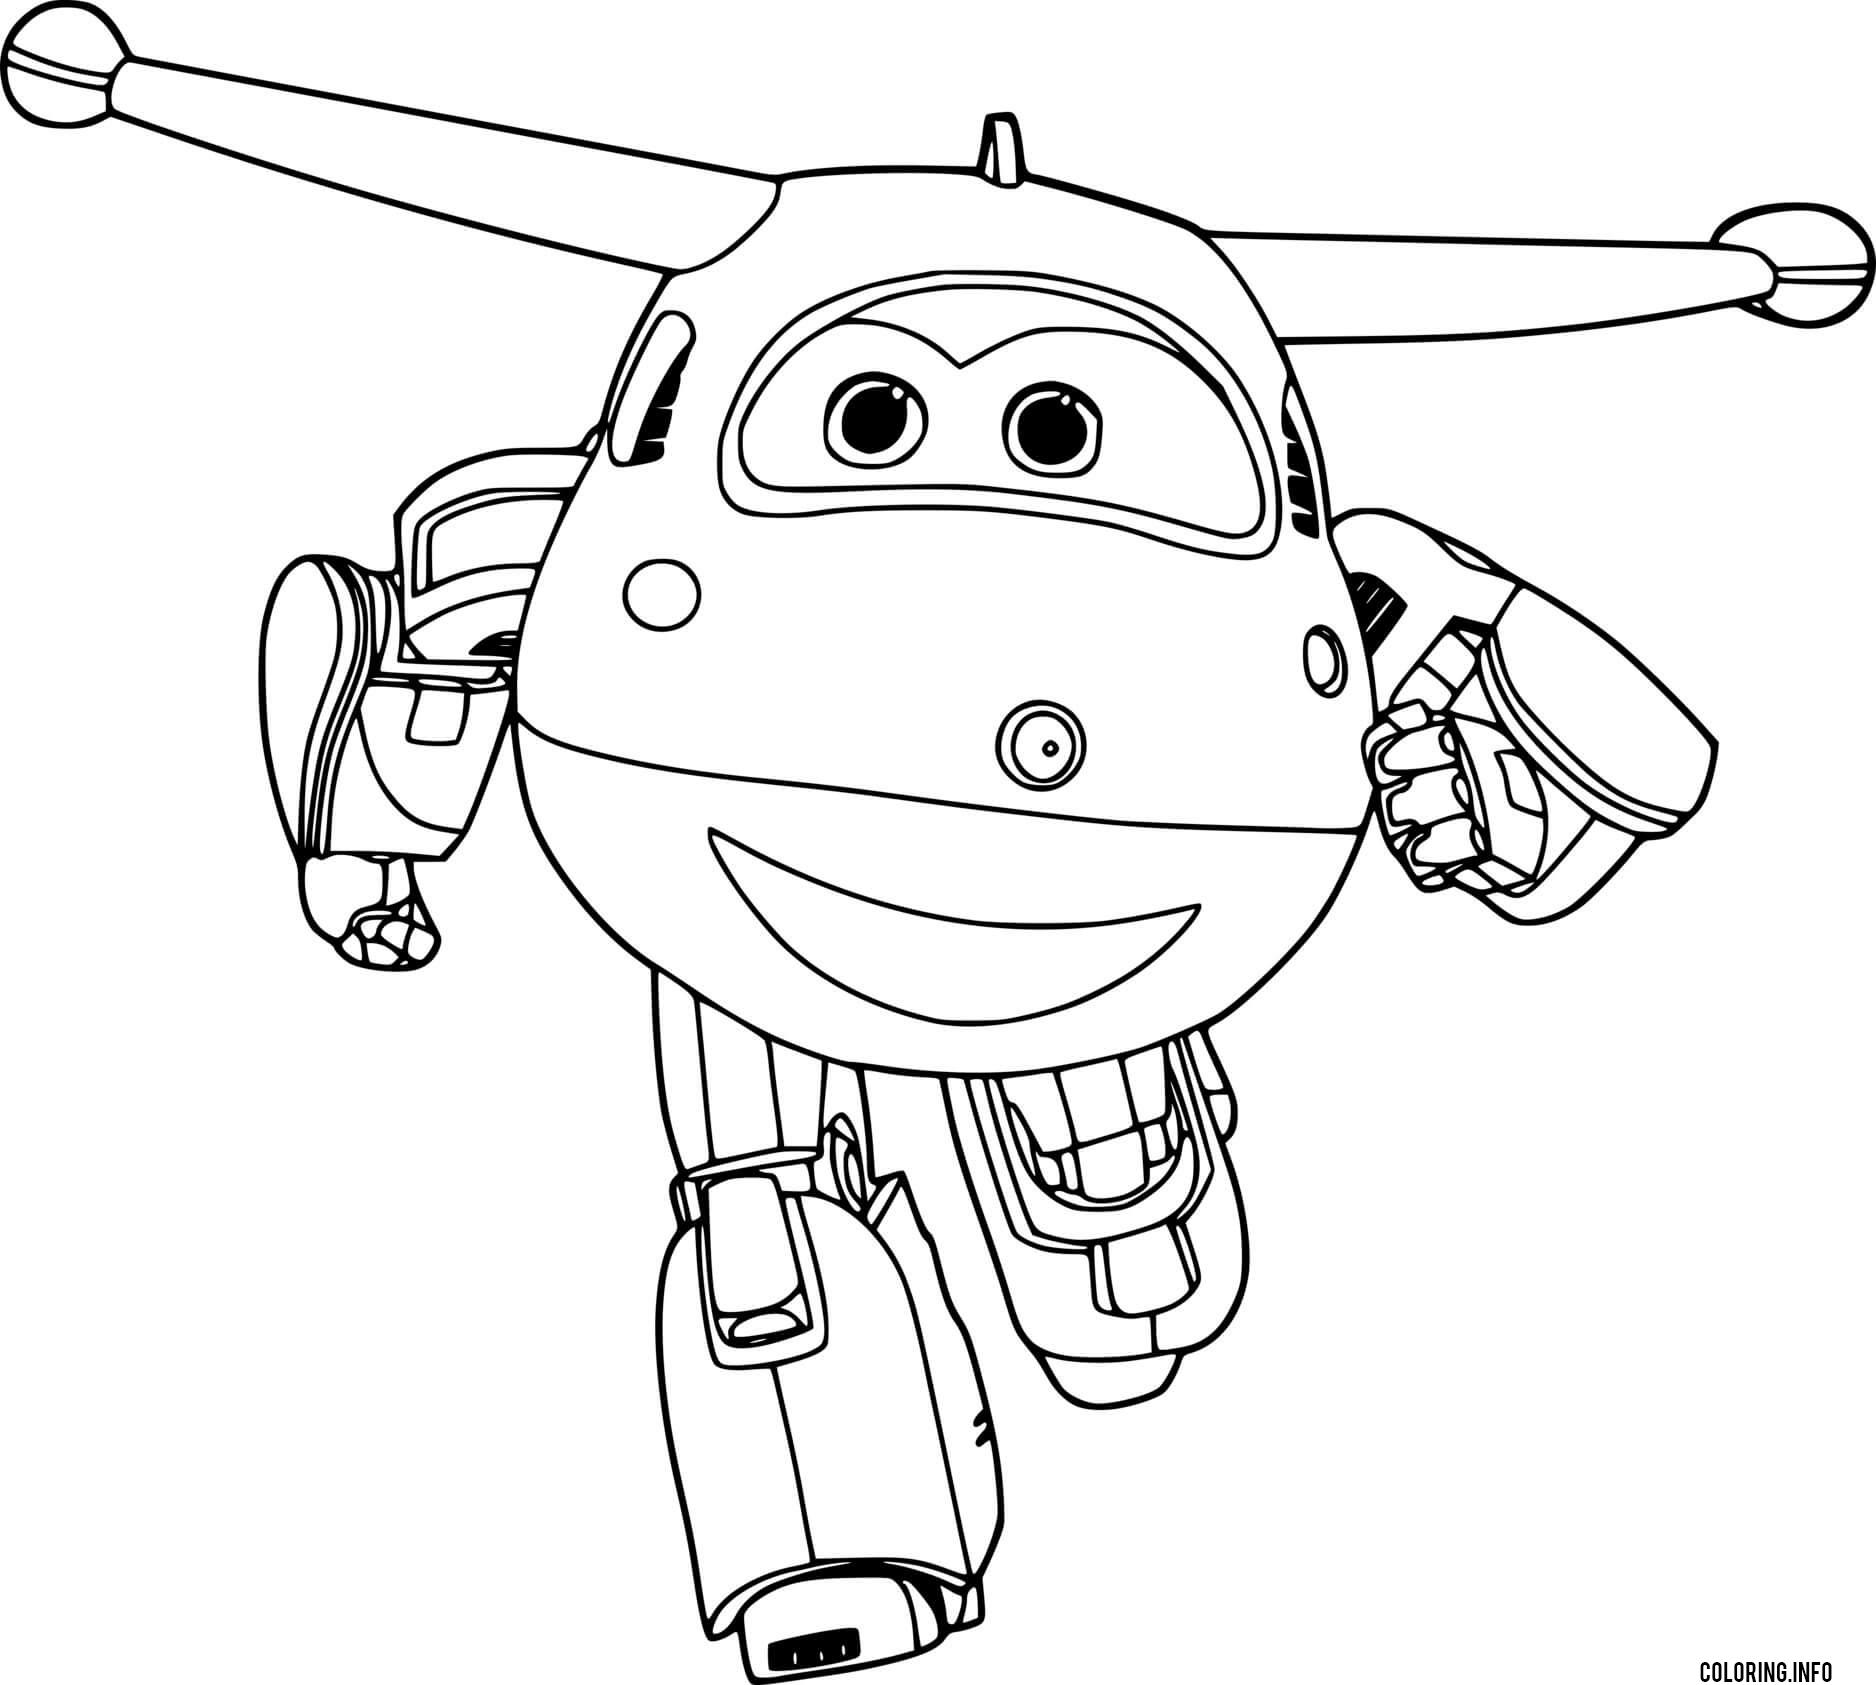 Super Wings Jett Is Running coloring